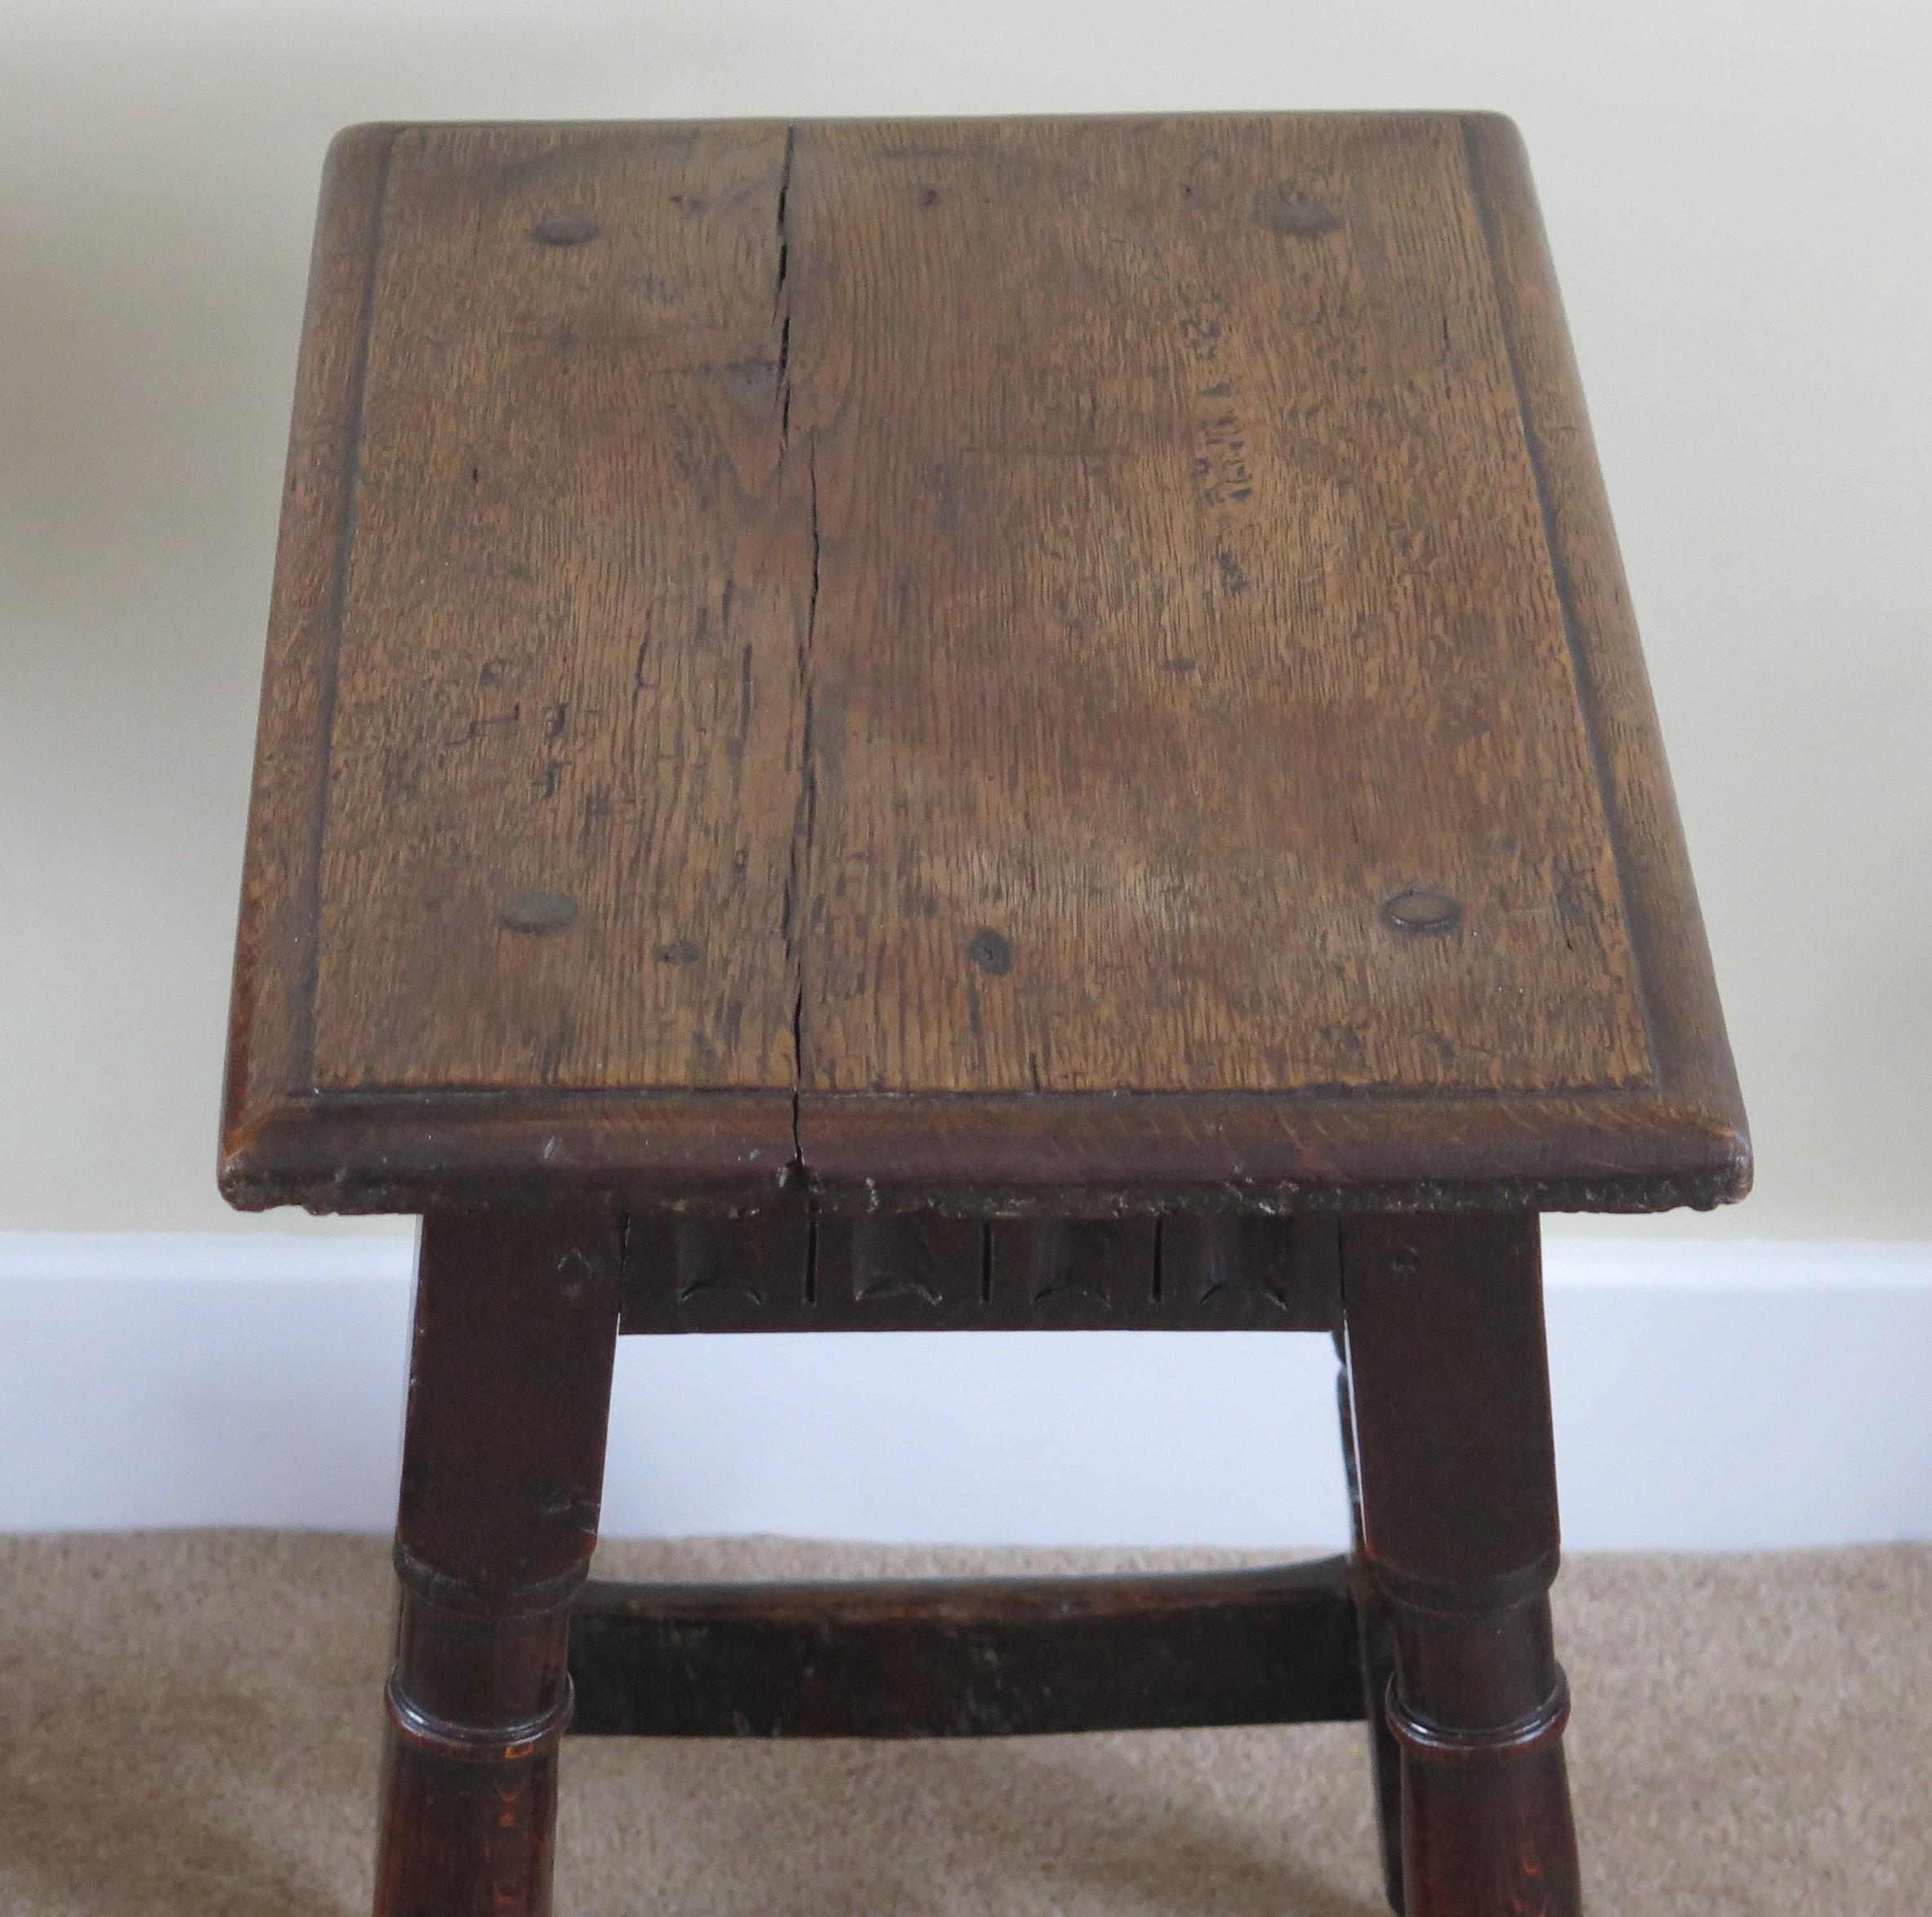 Charles 1st English Jointed Stool Oak, Early to Mid 17th Century, circa 1630 For Sale 4